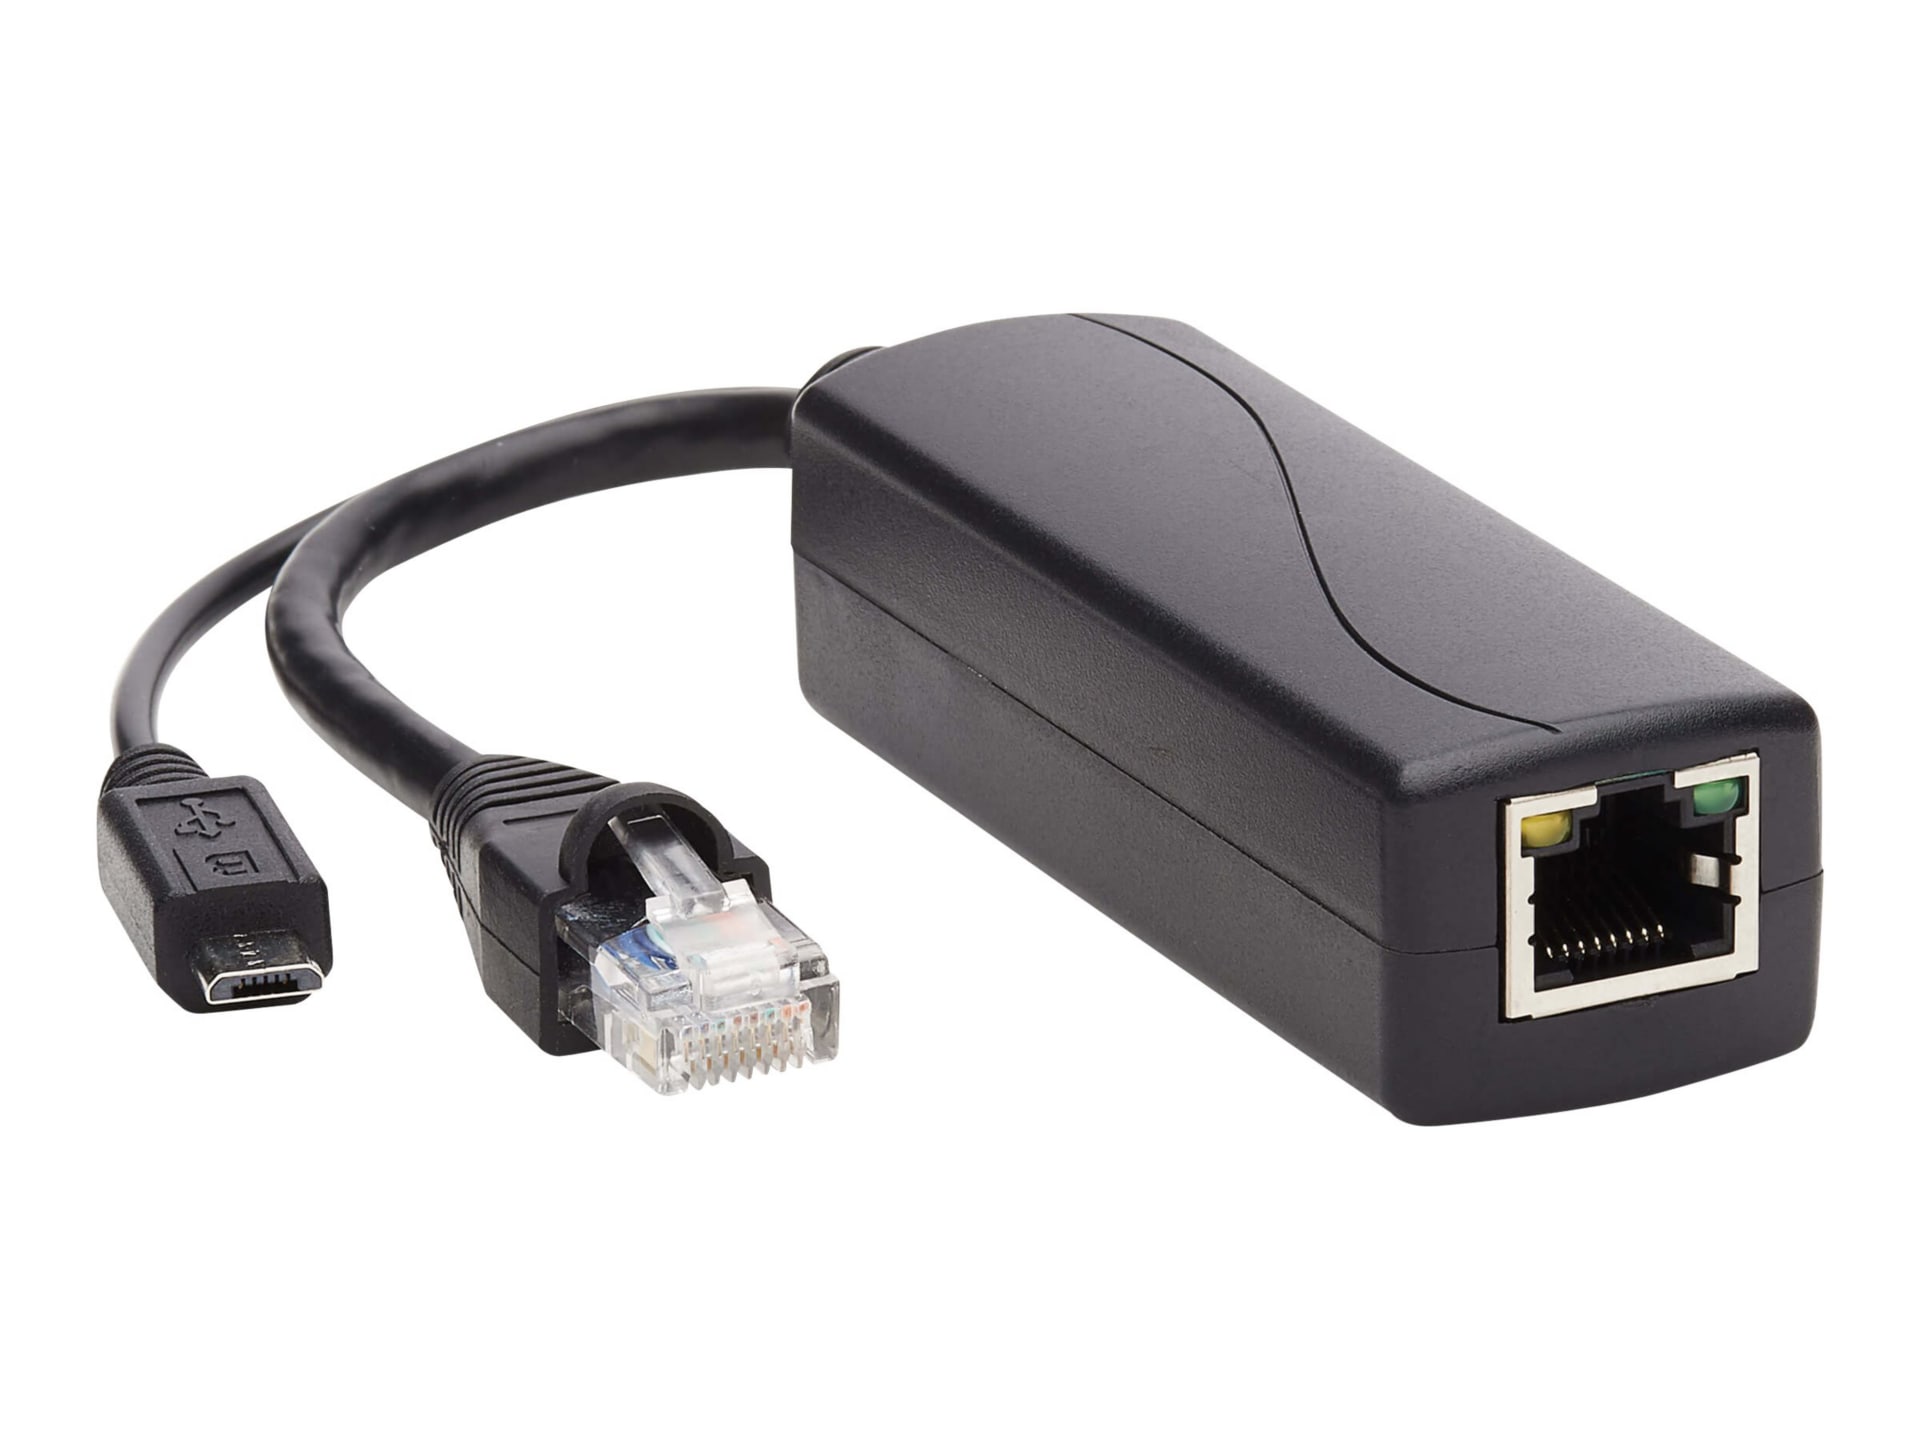 Eaton Tripp Lite Series PoE to USB Micro-B and RJ45 Active Splitter - 802.af, 48V to 5V 1A, Up to 328 ft. (100 m) - PoE